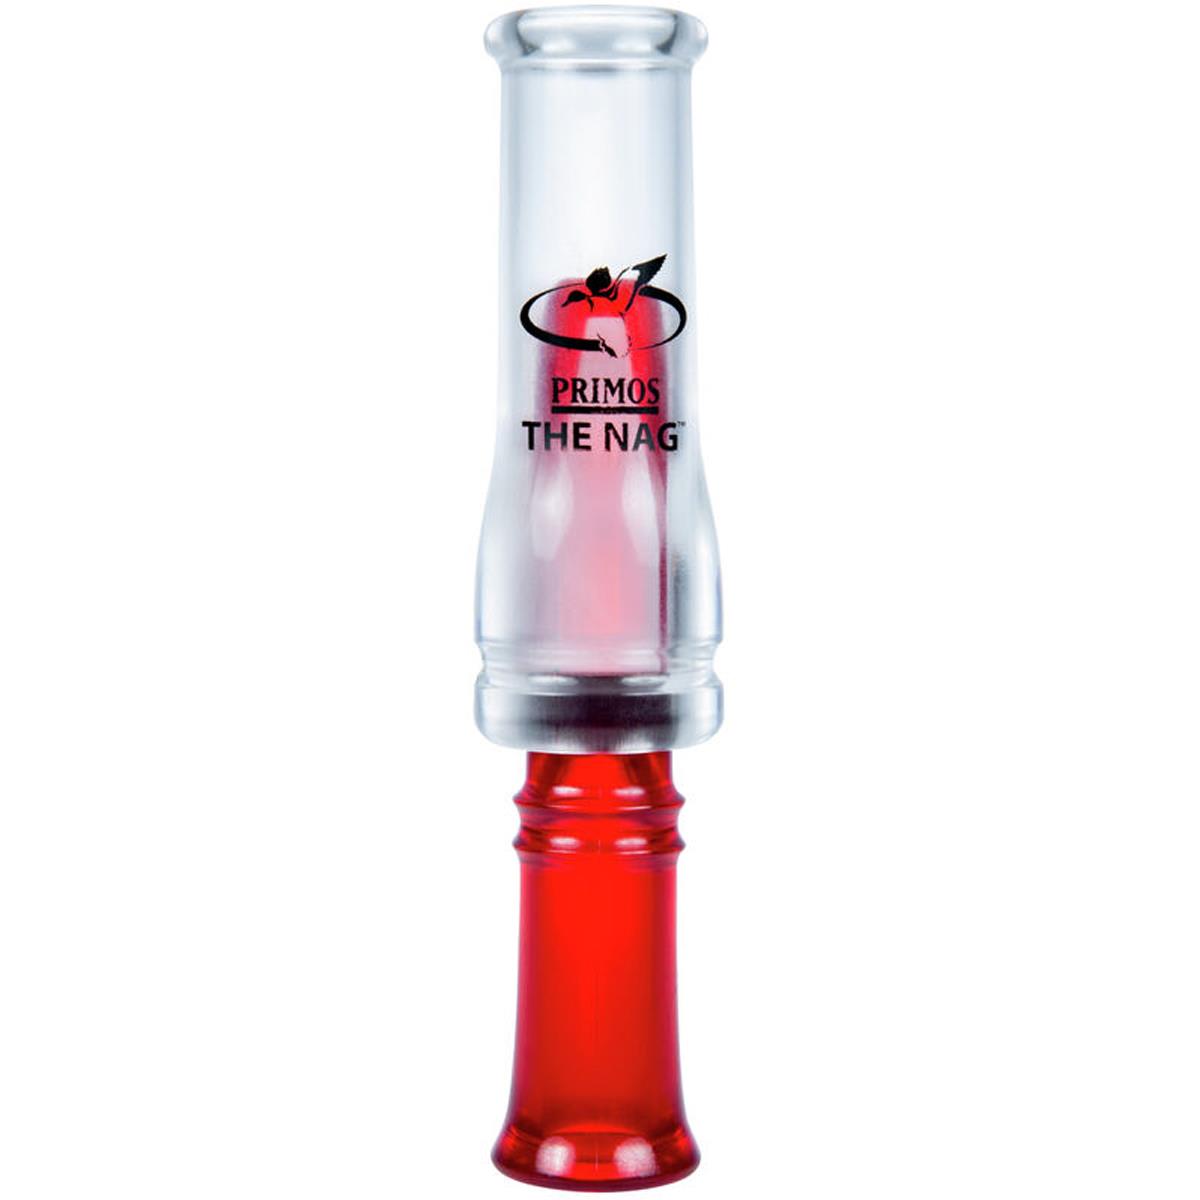 Image of Bushnell The Nag Duck Call